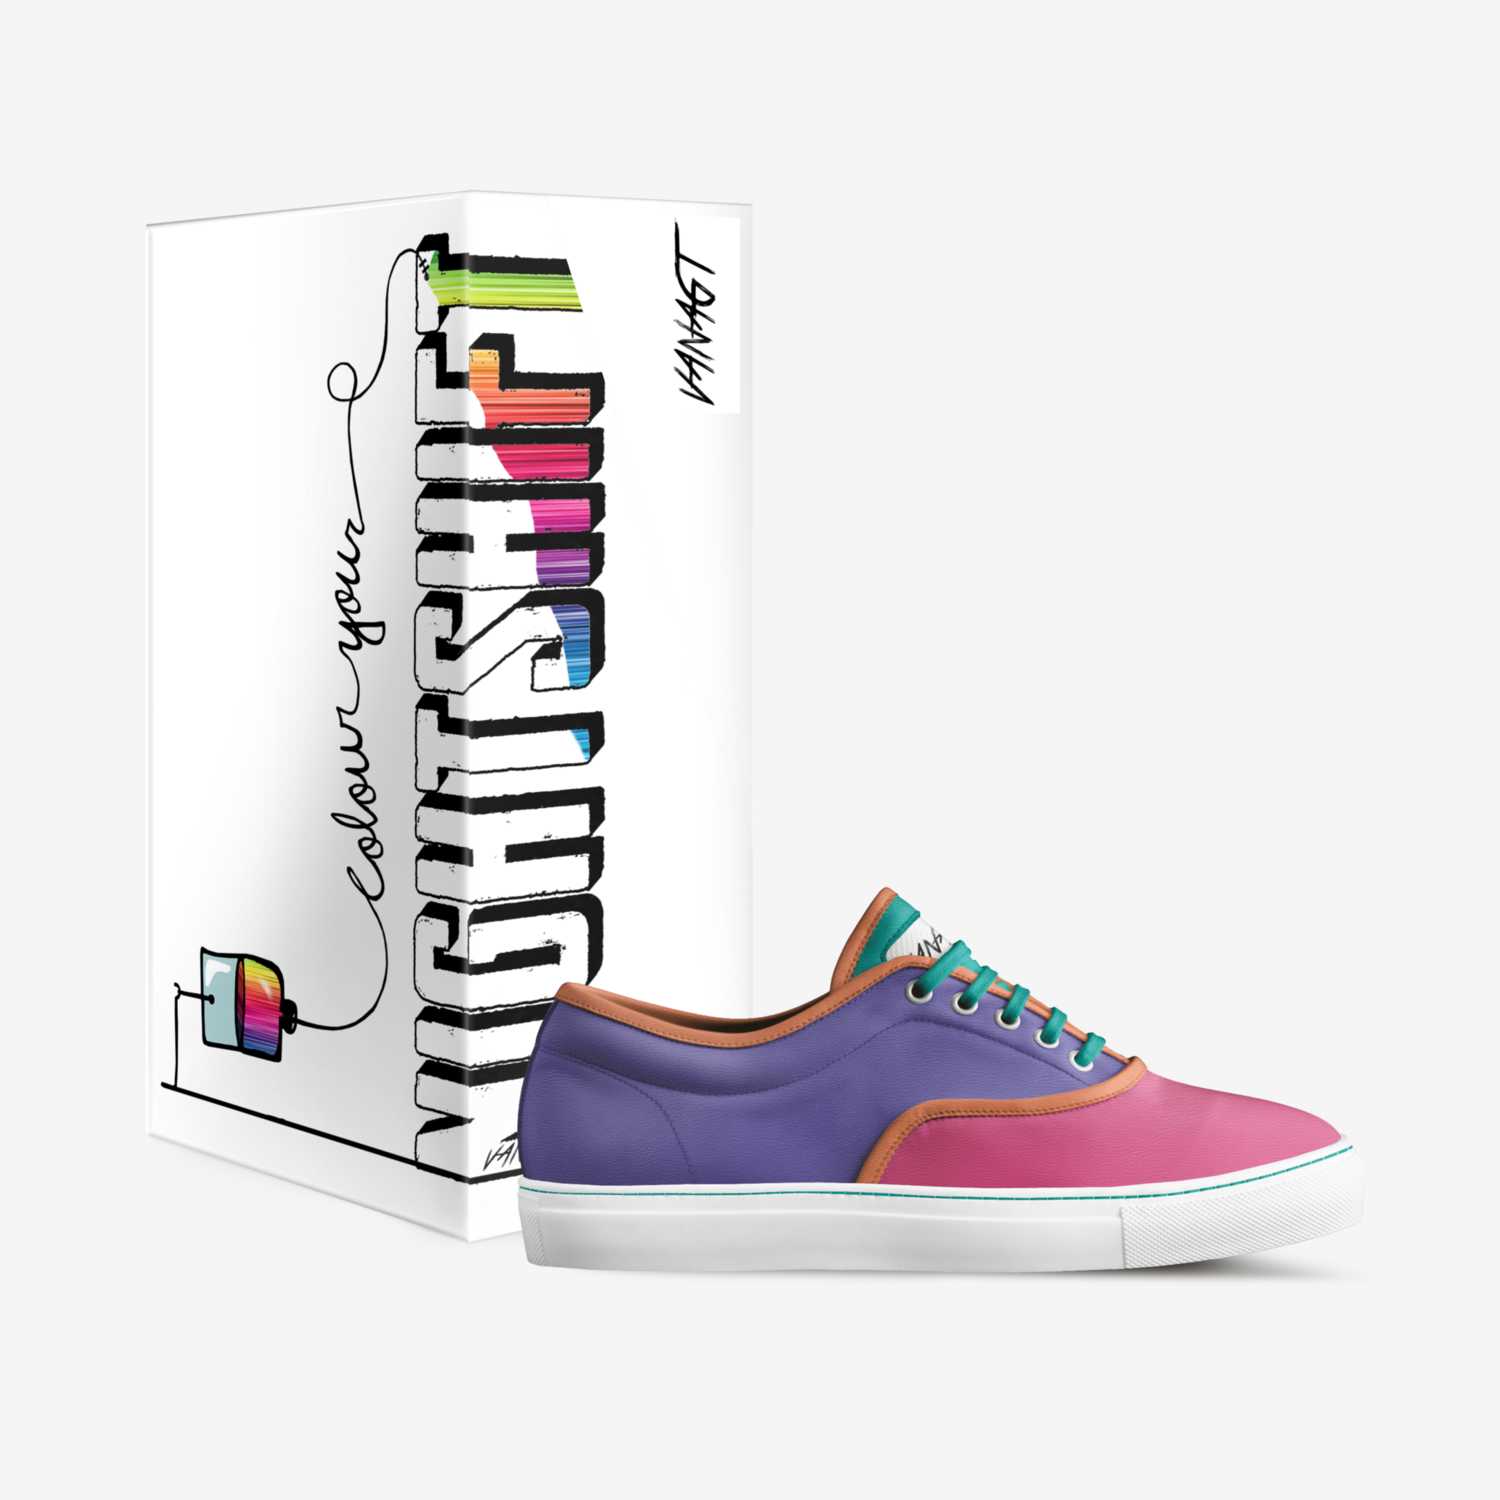 COLOUR YOUR NIGHTSHIFT custom made in Italy shoes by Marjolijn van Agt | Box view